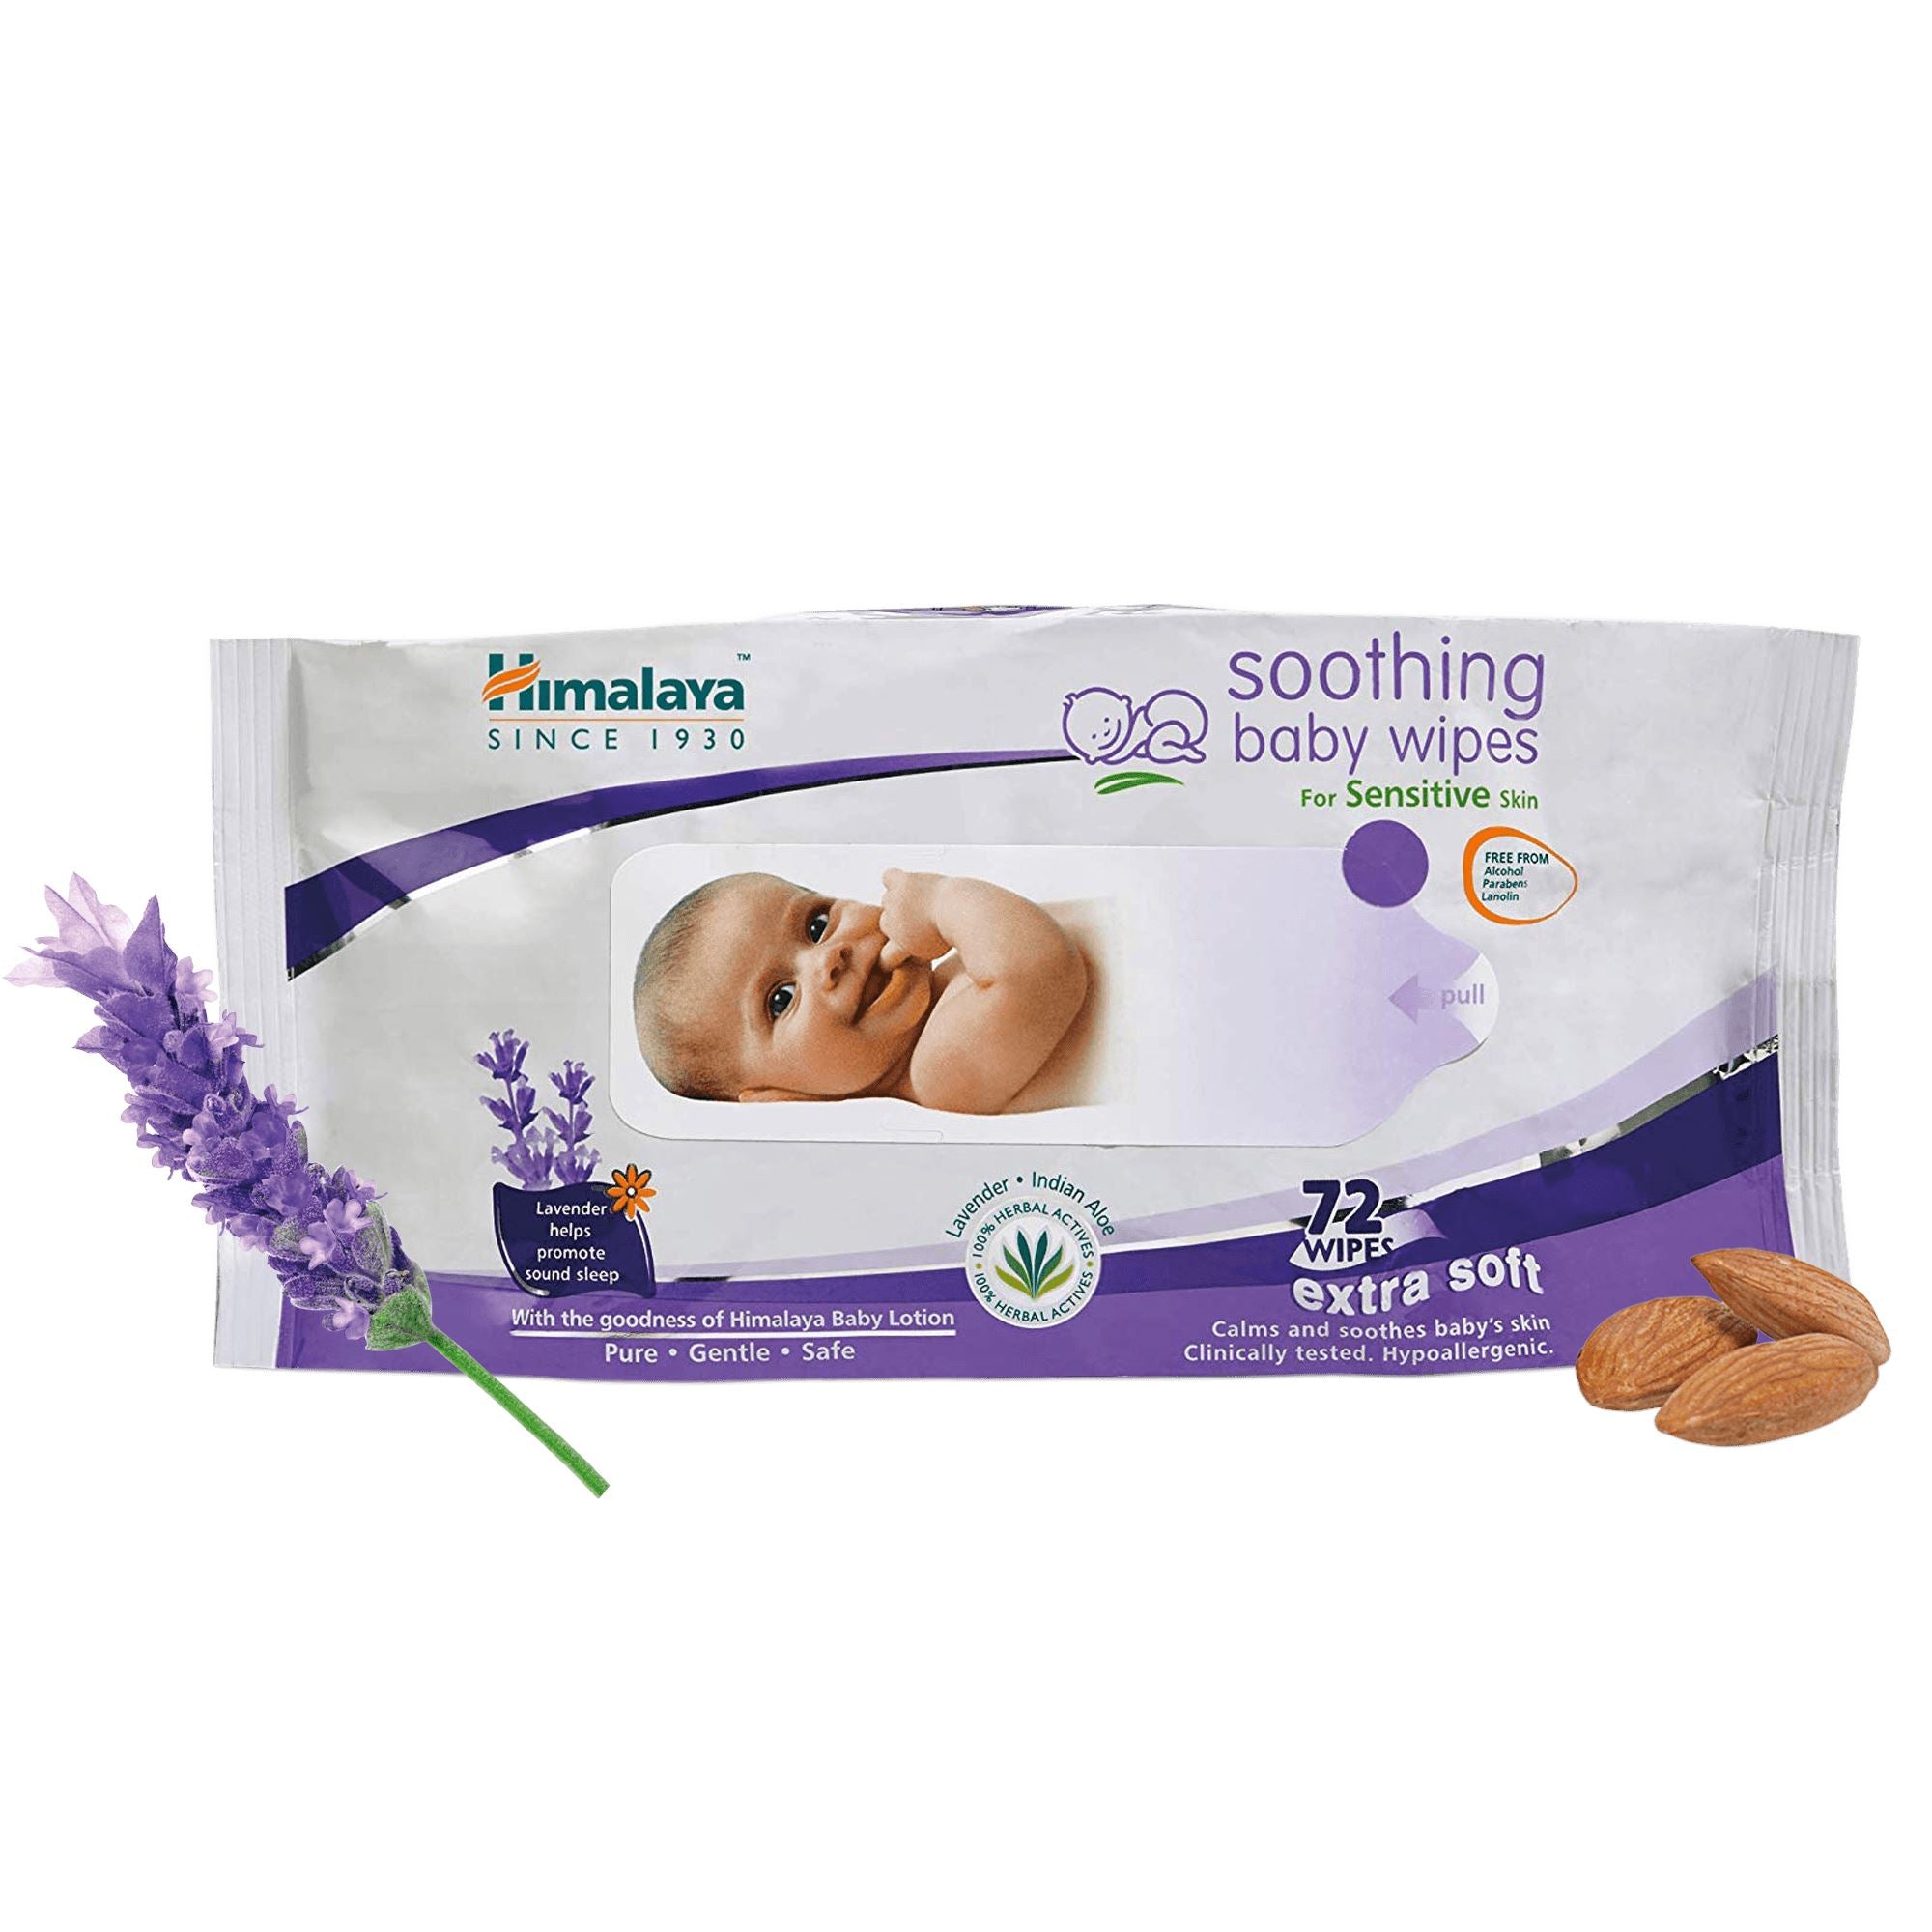 Himalaya soothing baby wipes 72s - Soothes skin and relaxes baby